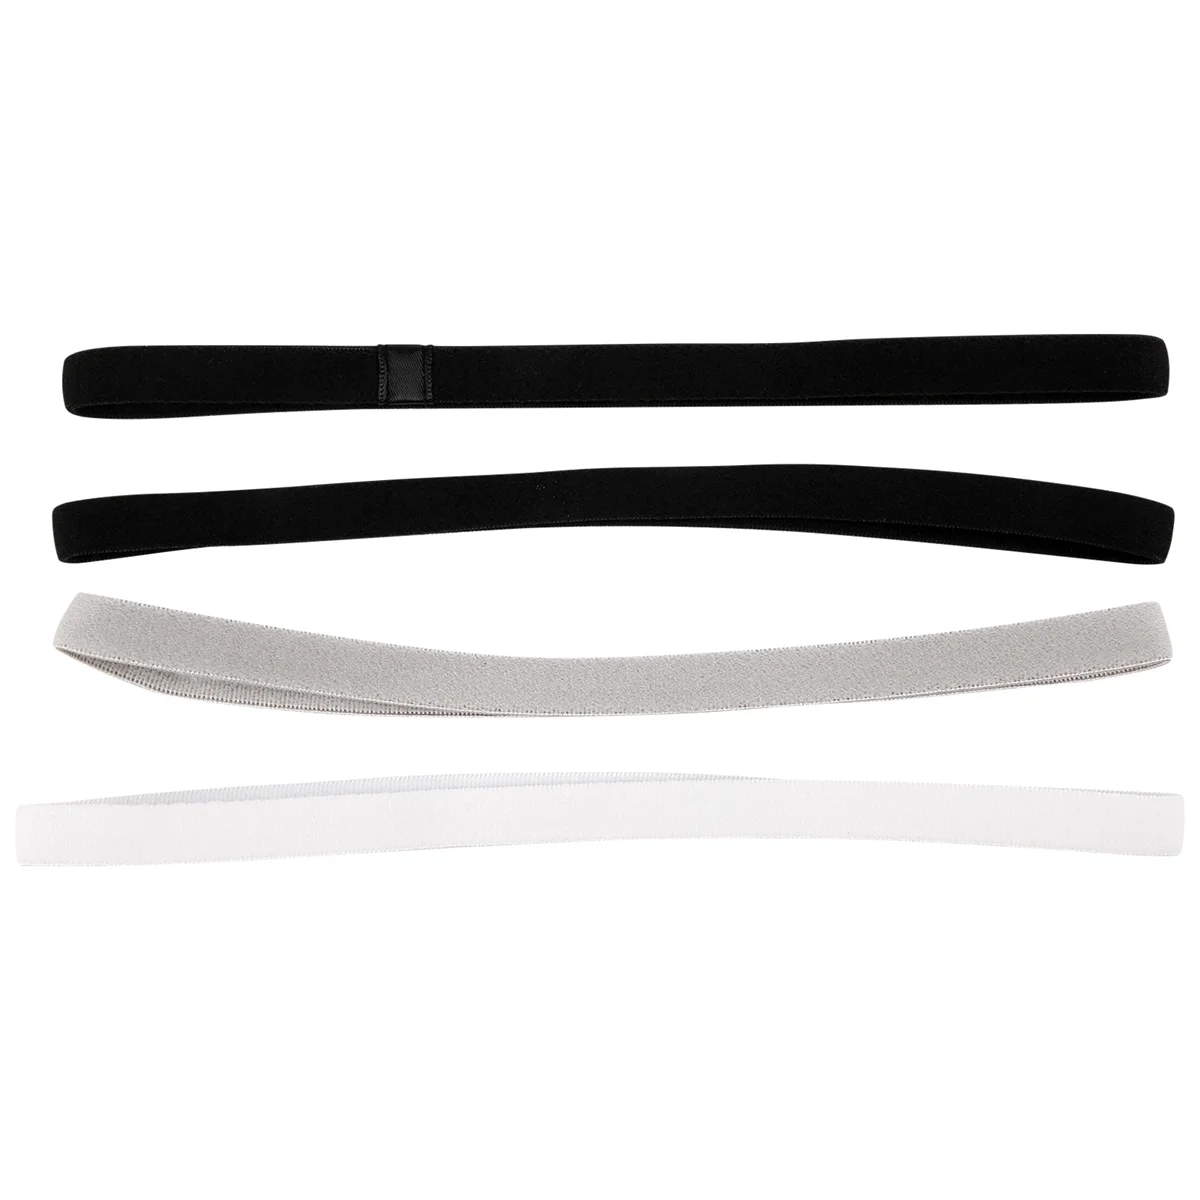 

4 Pieces Thick Non-Slip Elastic Sport Headbands Hair Headbands,Exercise Hair and Sweatbands for Women and Men